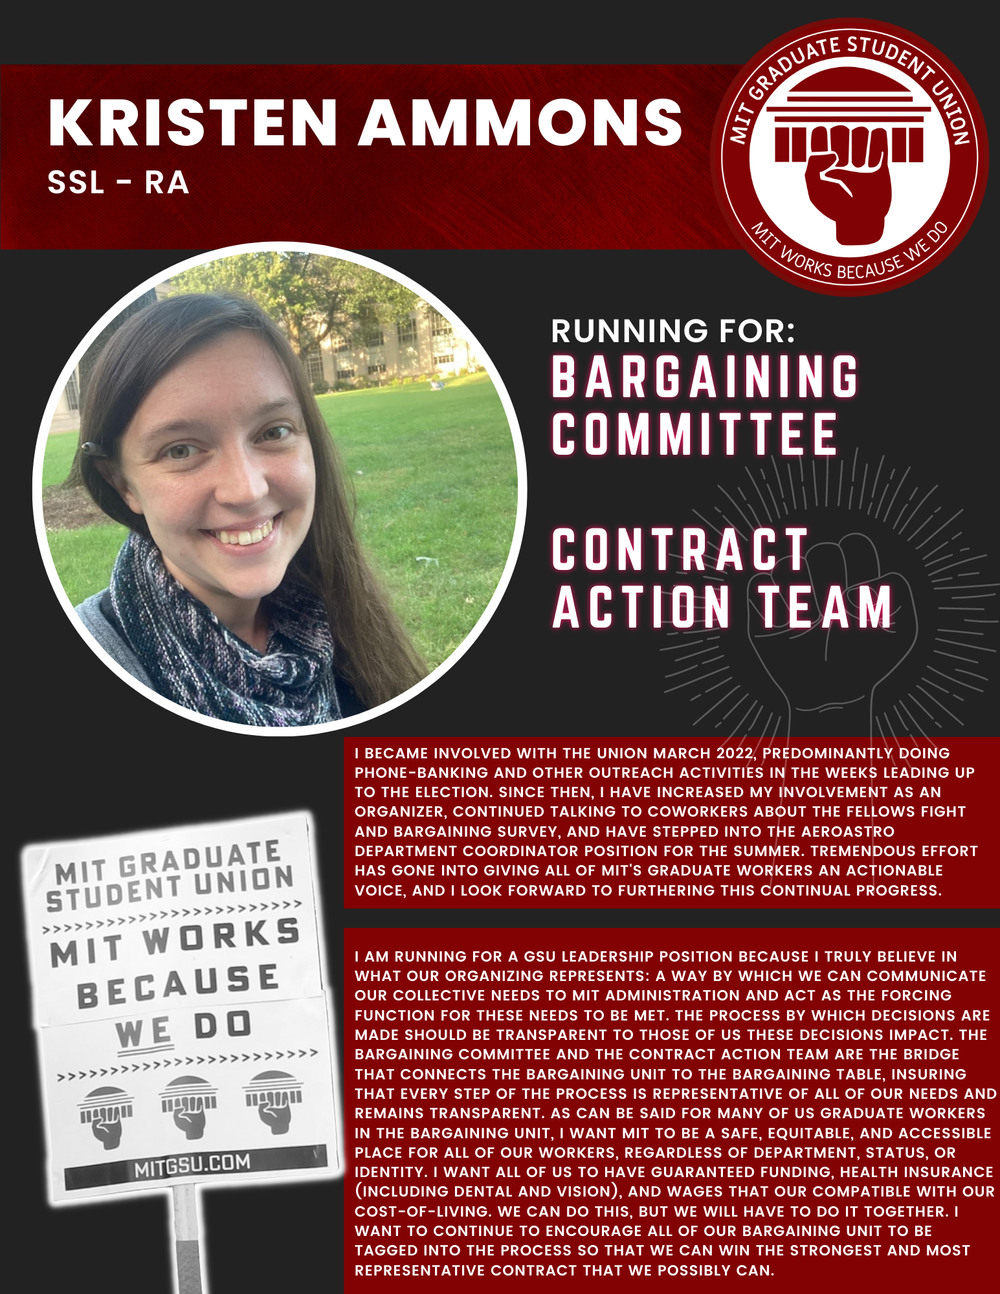  KRISTEN AMMONS SSL - RA   RUNNING FOR:  Bargaining Committee  Contract Action Team  I BECAME INVOLVED WITH THE UNION MARCH 2022, PREDOMINANTLY DOING PHONE-BANKING AND OTHER OUTREACH ACTIVITIES IN THE WEEKS LEADING UP TO THE ELECTION. SINCE THEN, I H